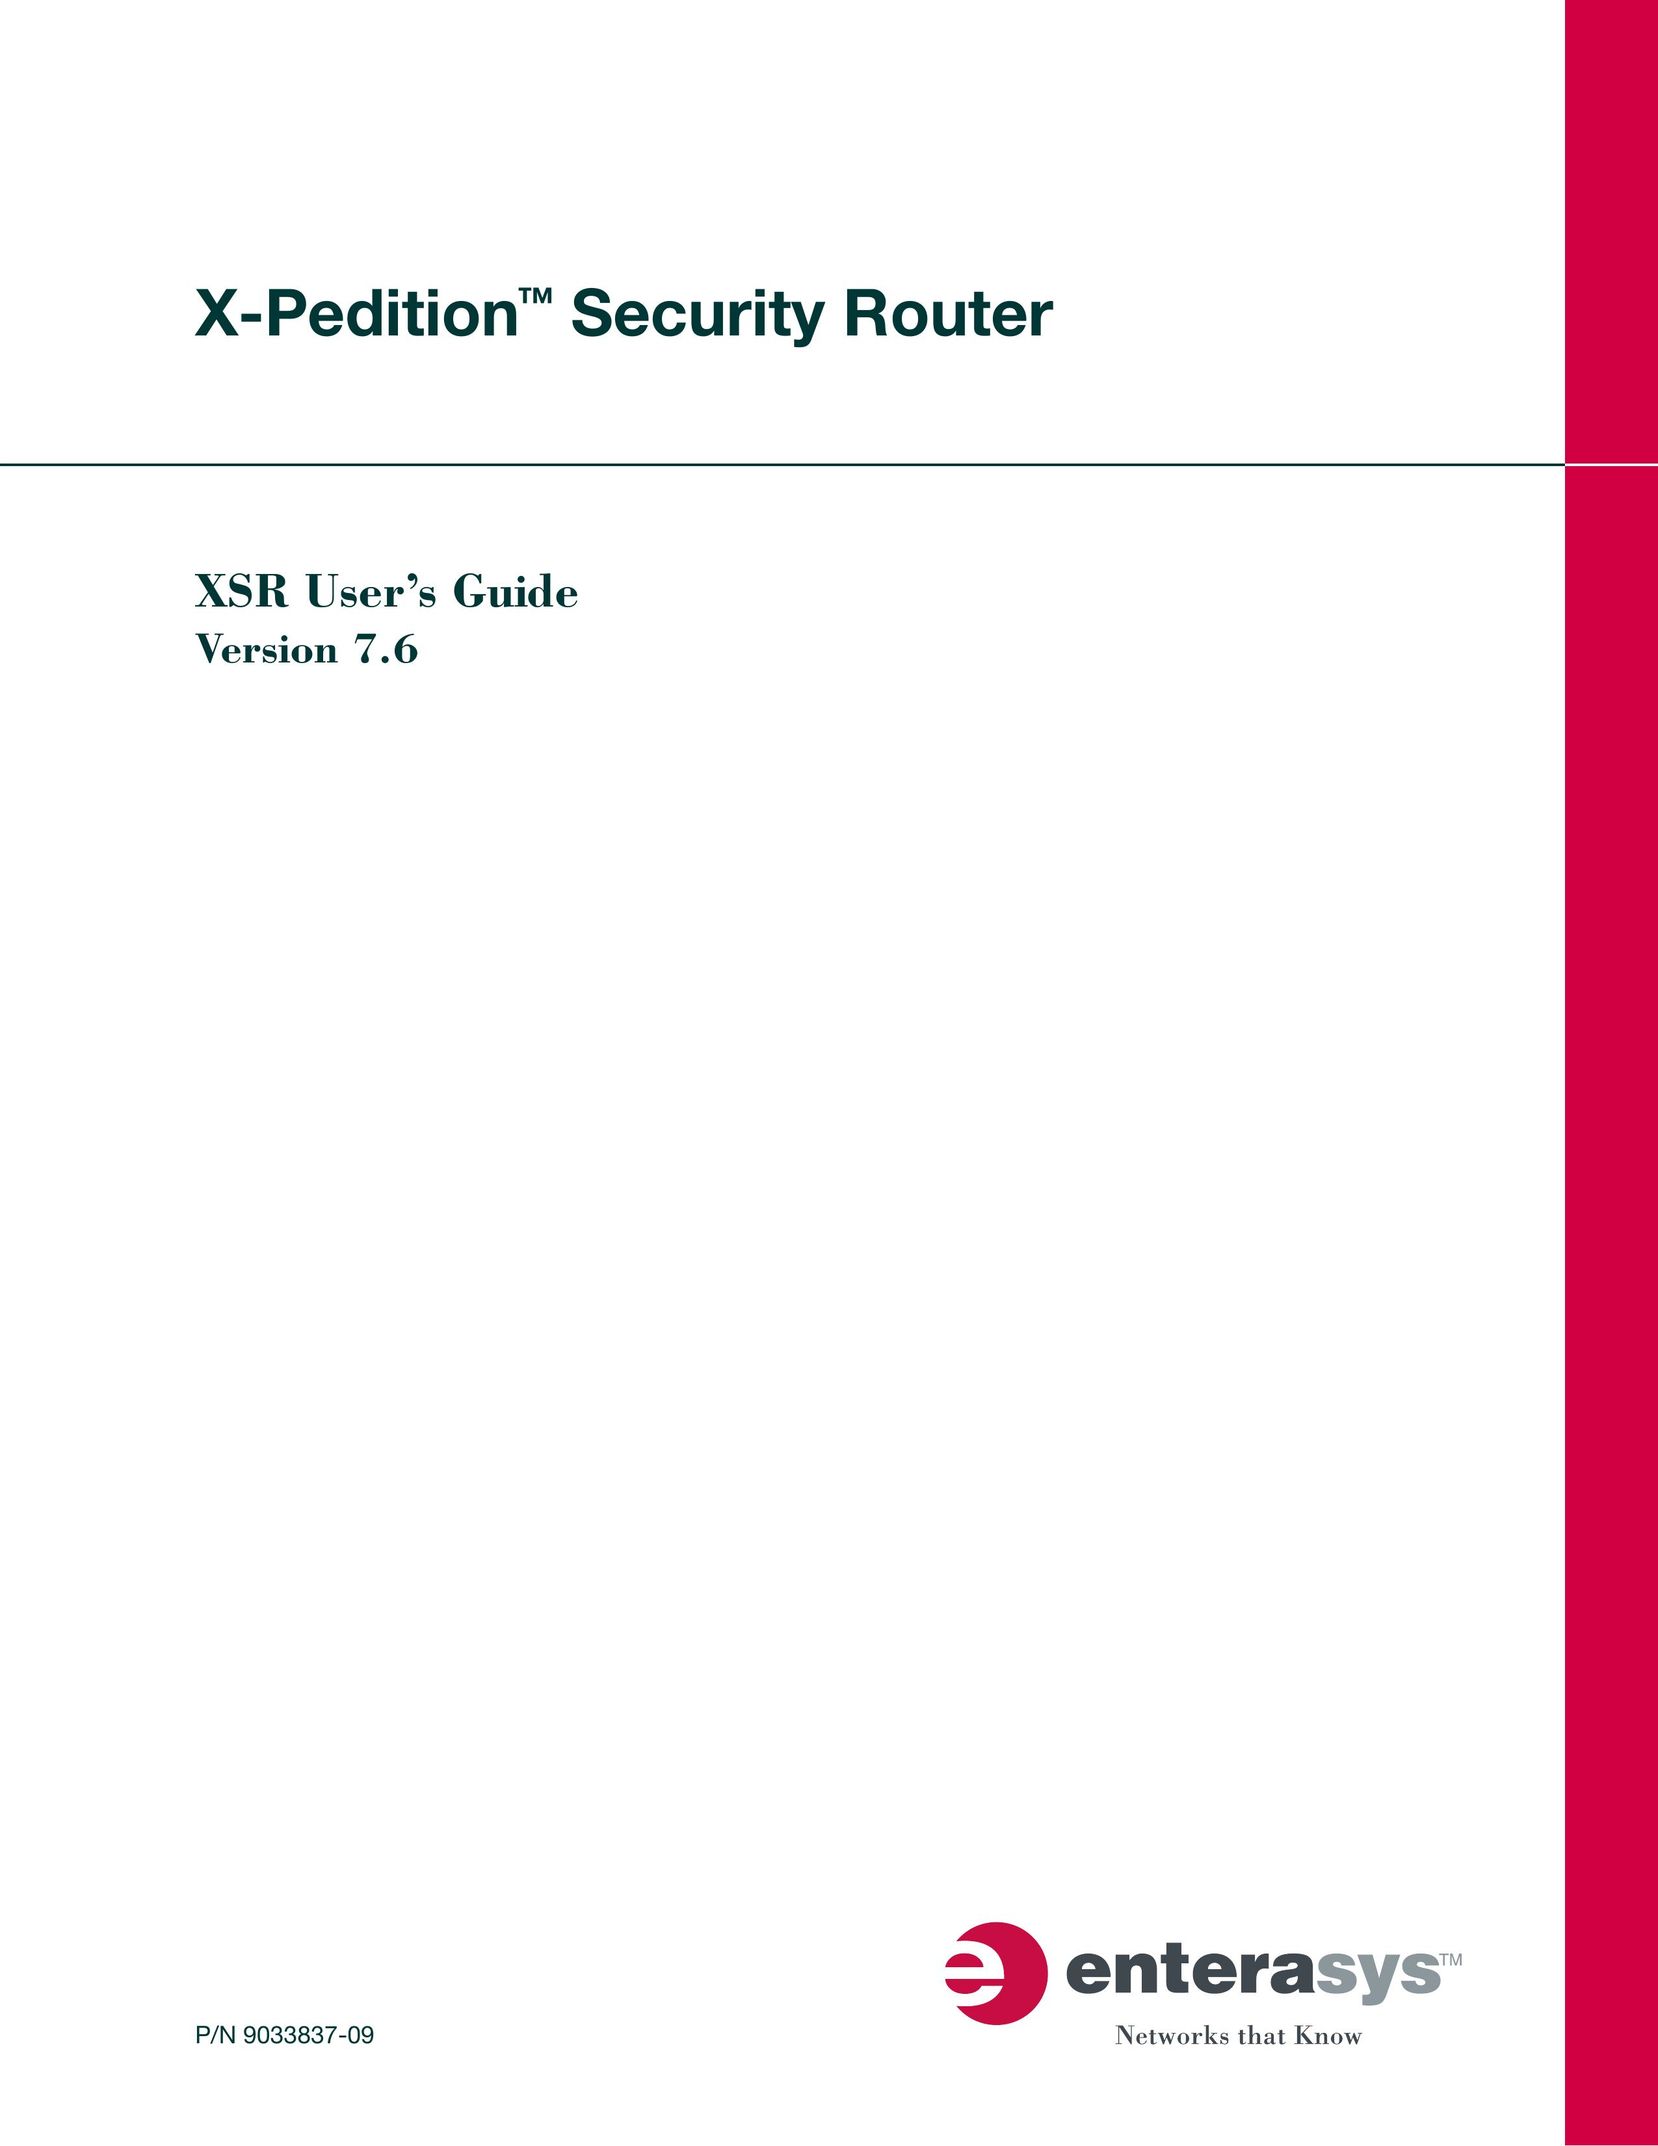 Enterasys Networks X-PeditionTM Network Router User Manual